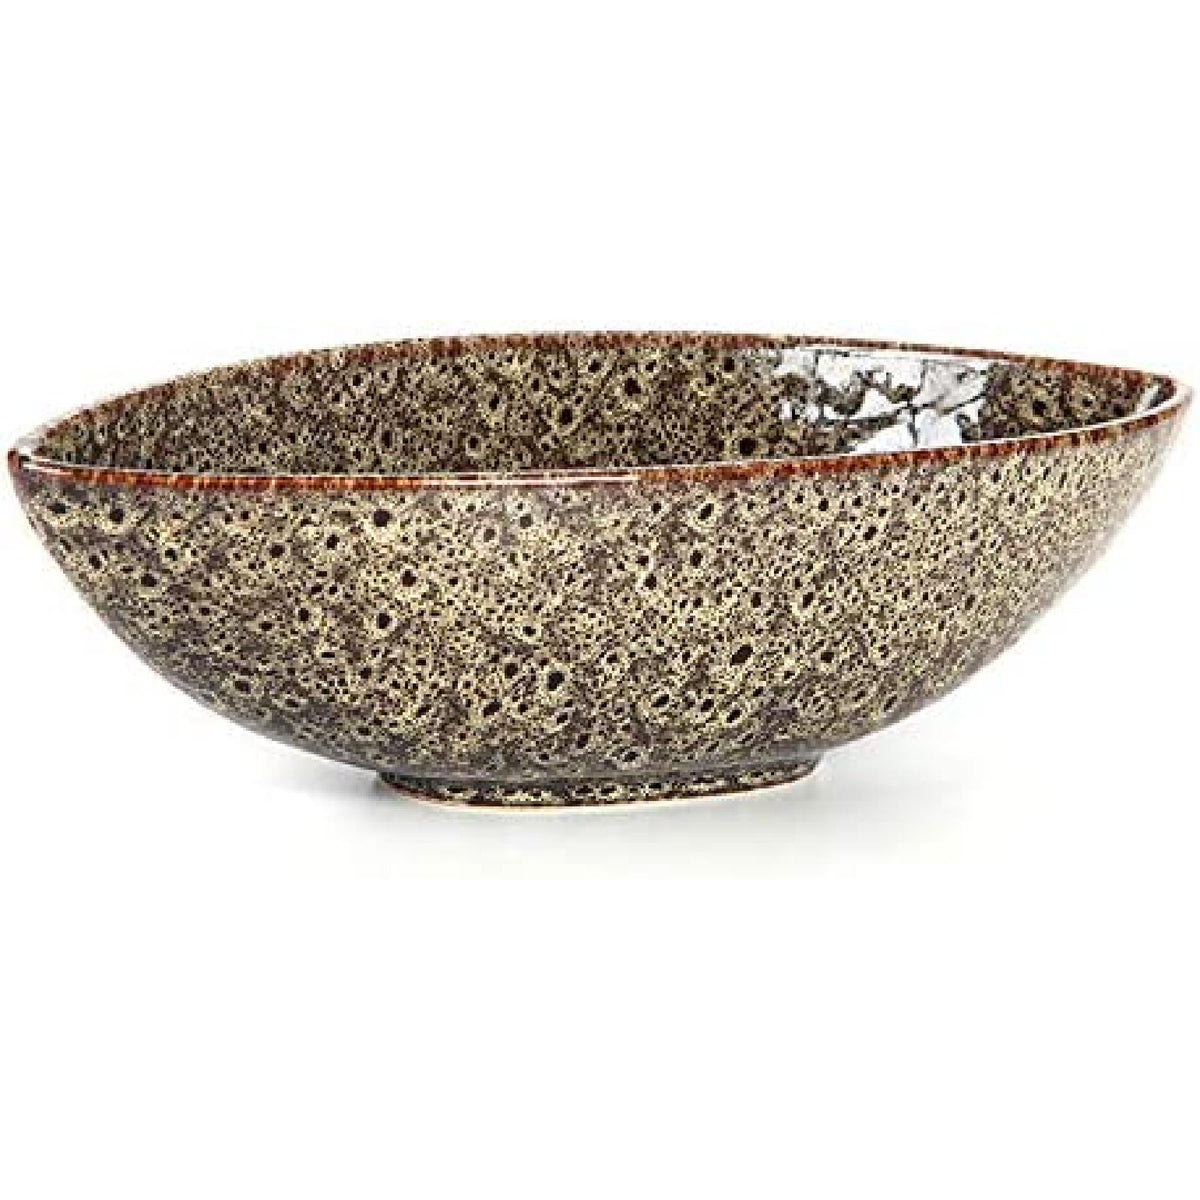 HOSELY® Ceramic Peacock Bowl,  Brown, 14.4 inches Long